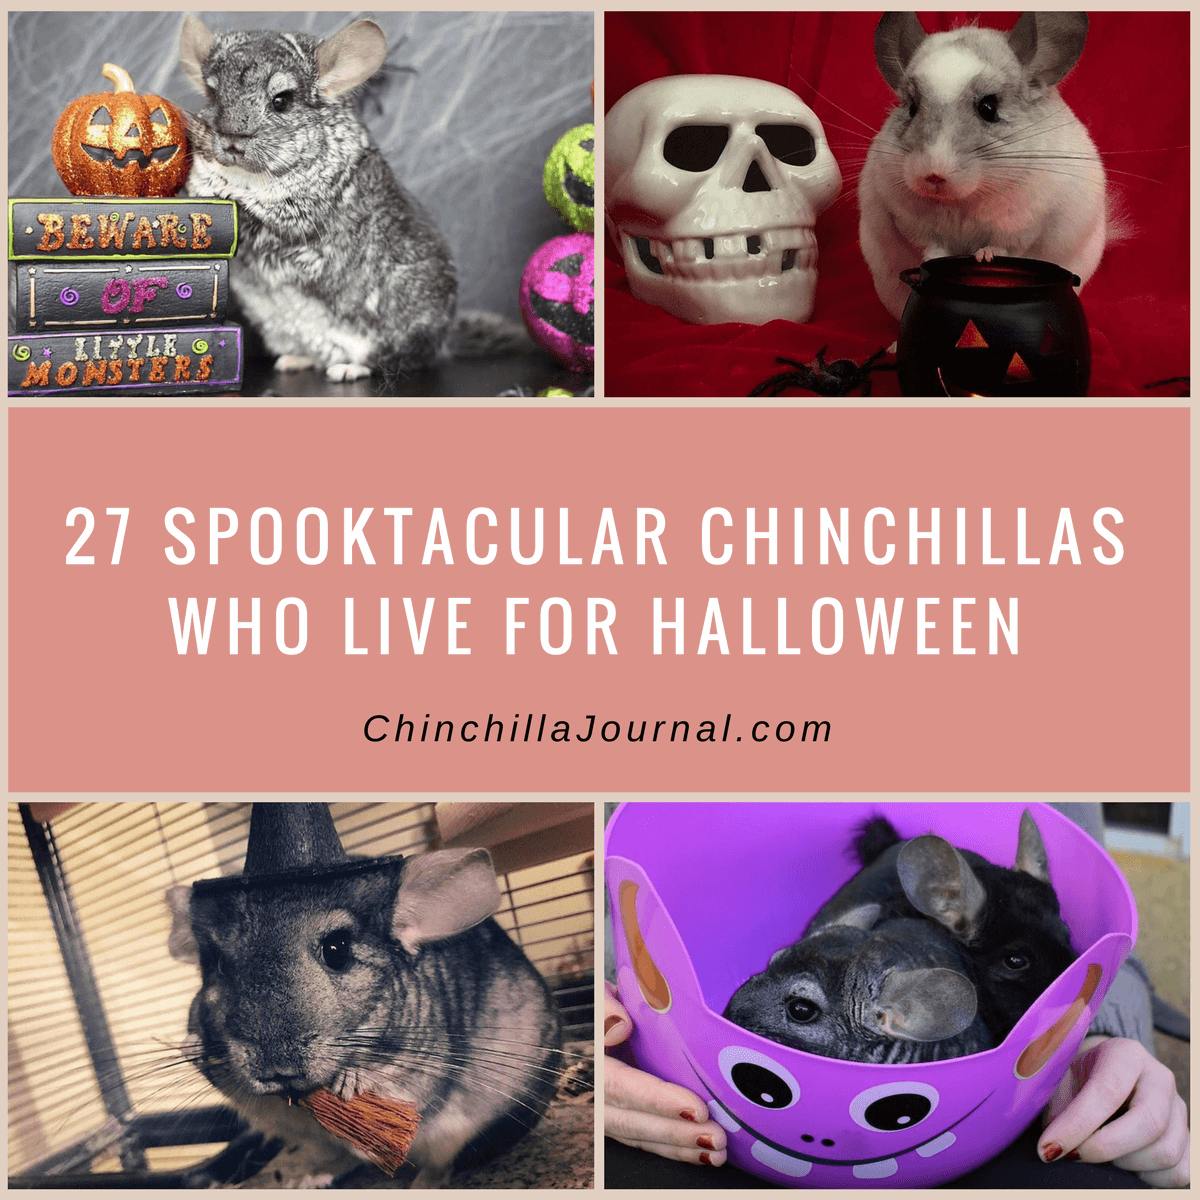 27 Spooktacular Chinchillas Who Live For Halloween